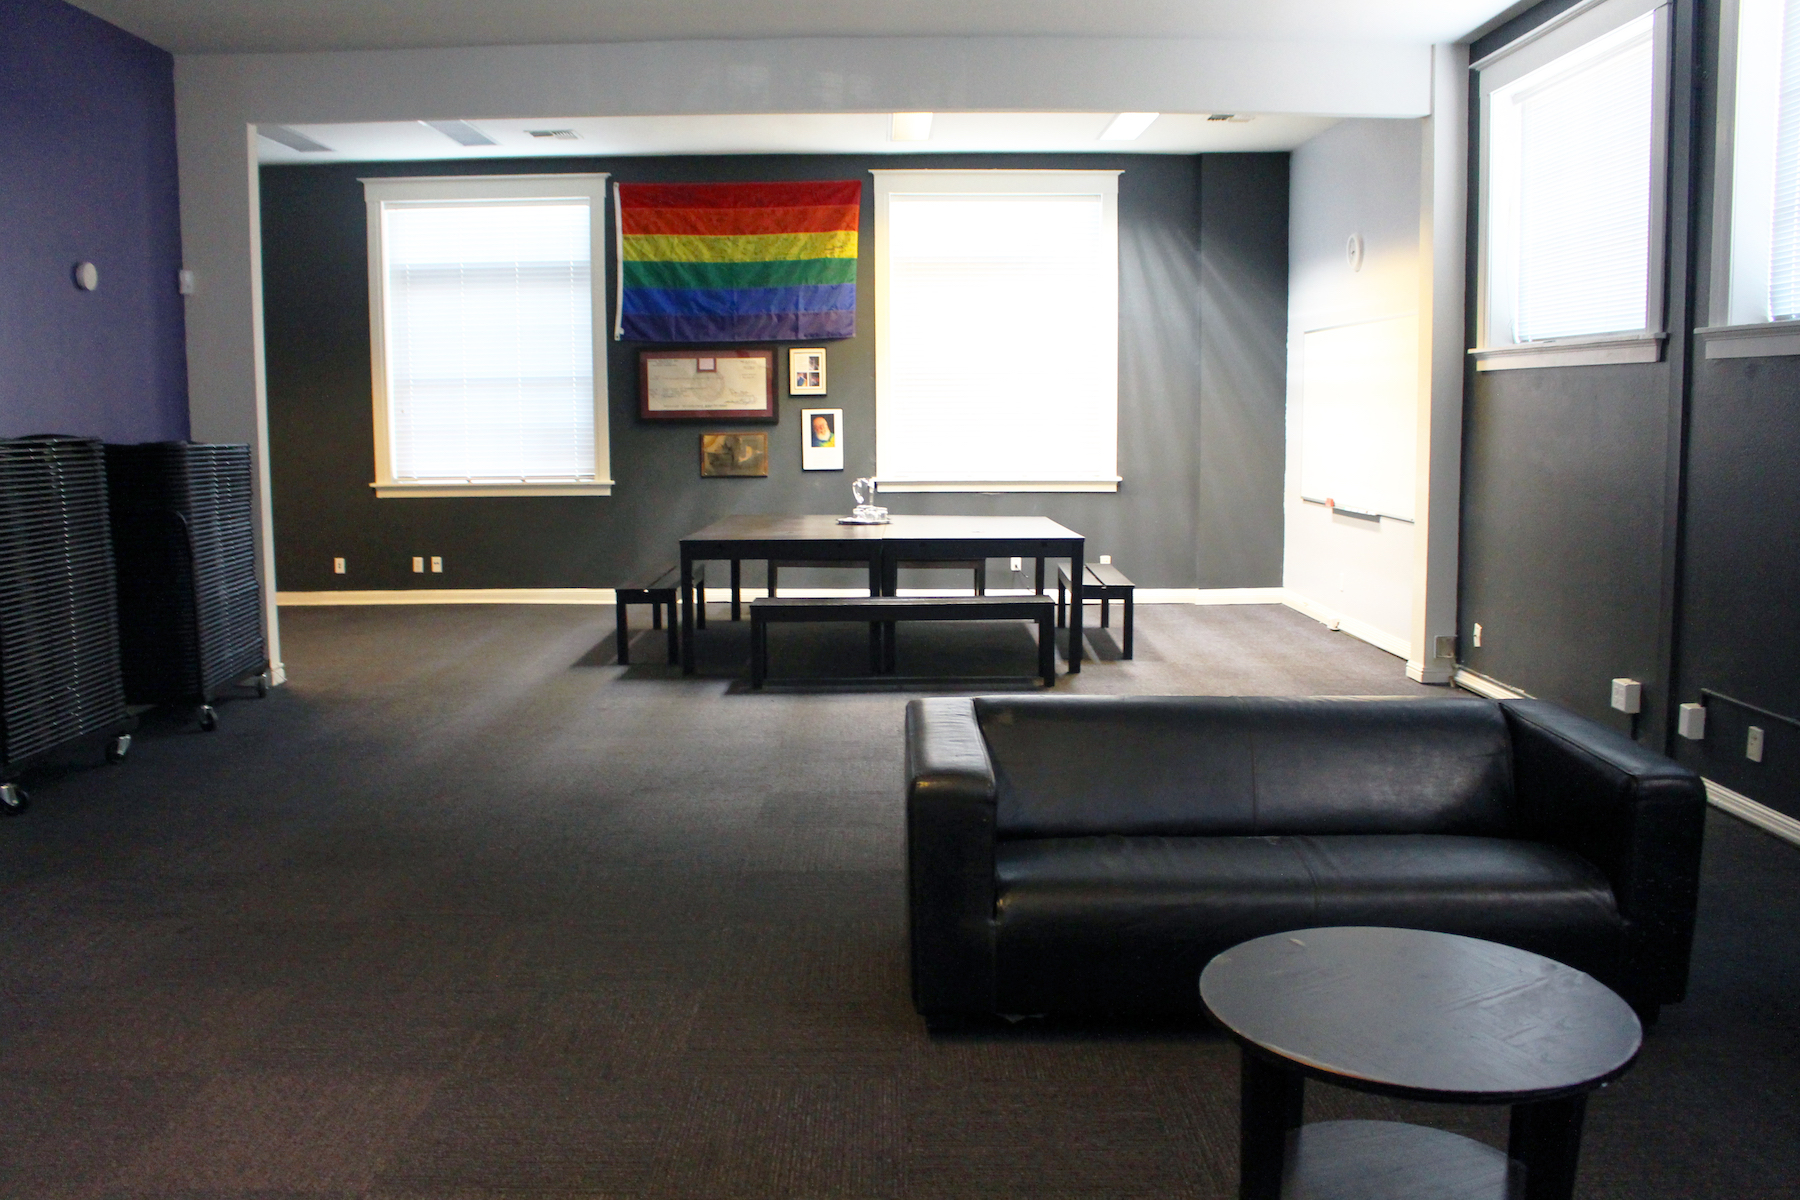 Founders room at the Sac LGBT Center